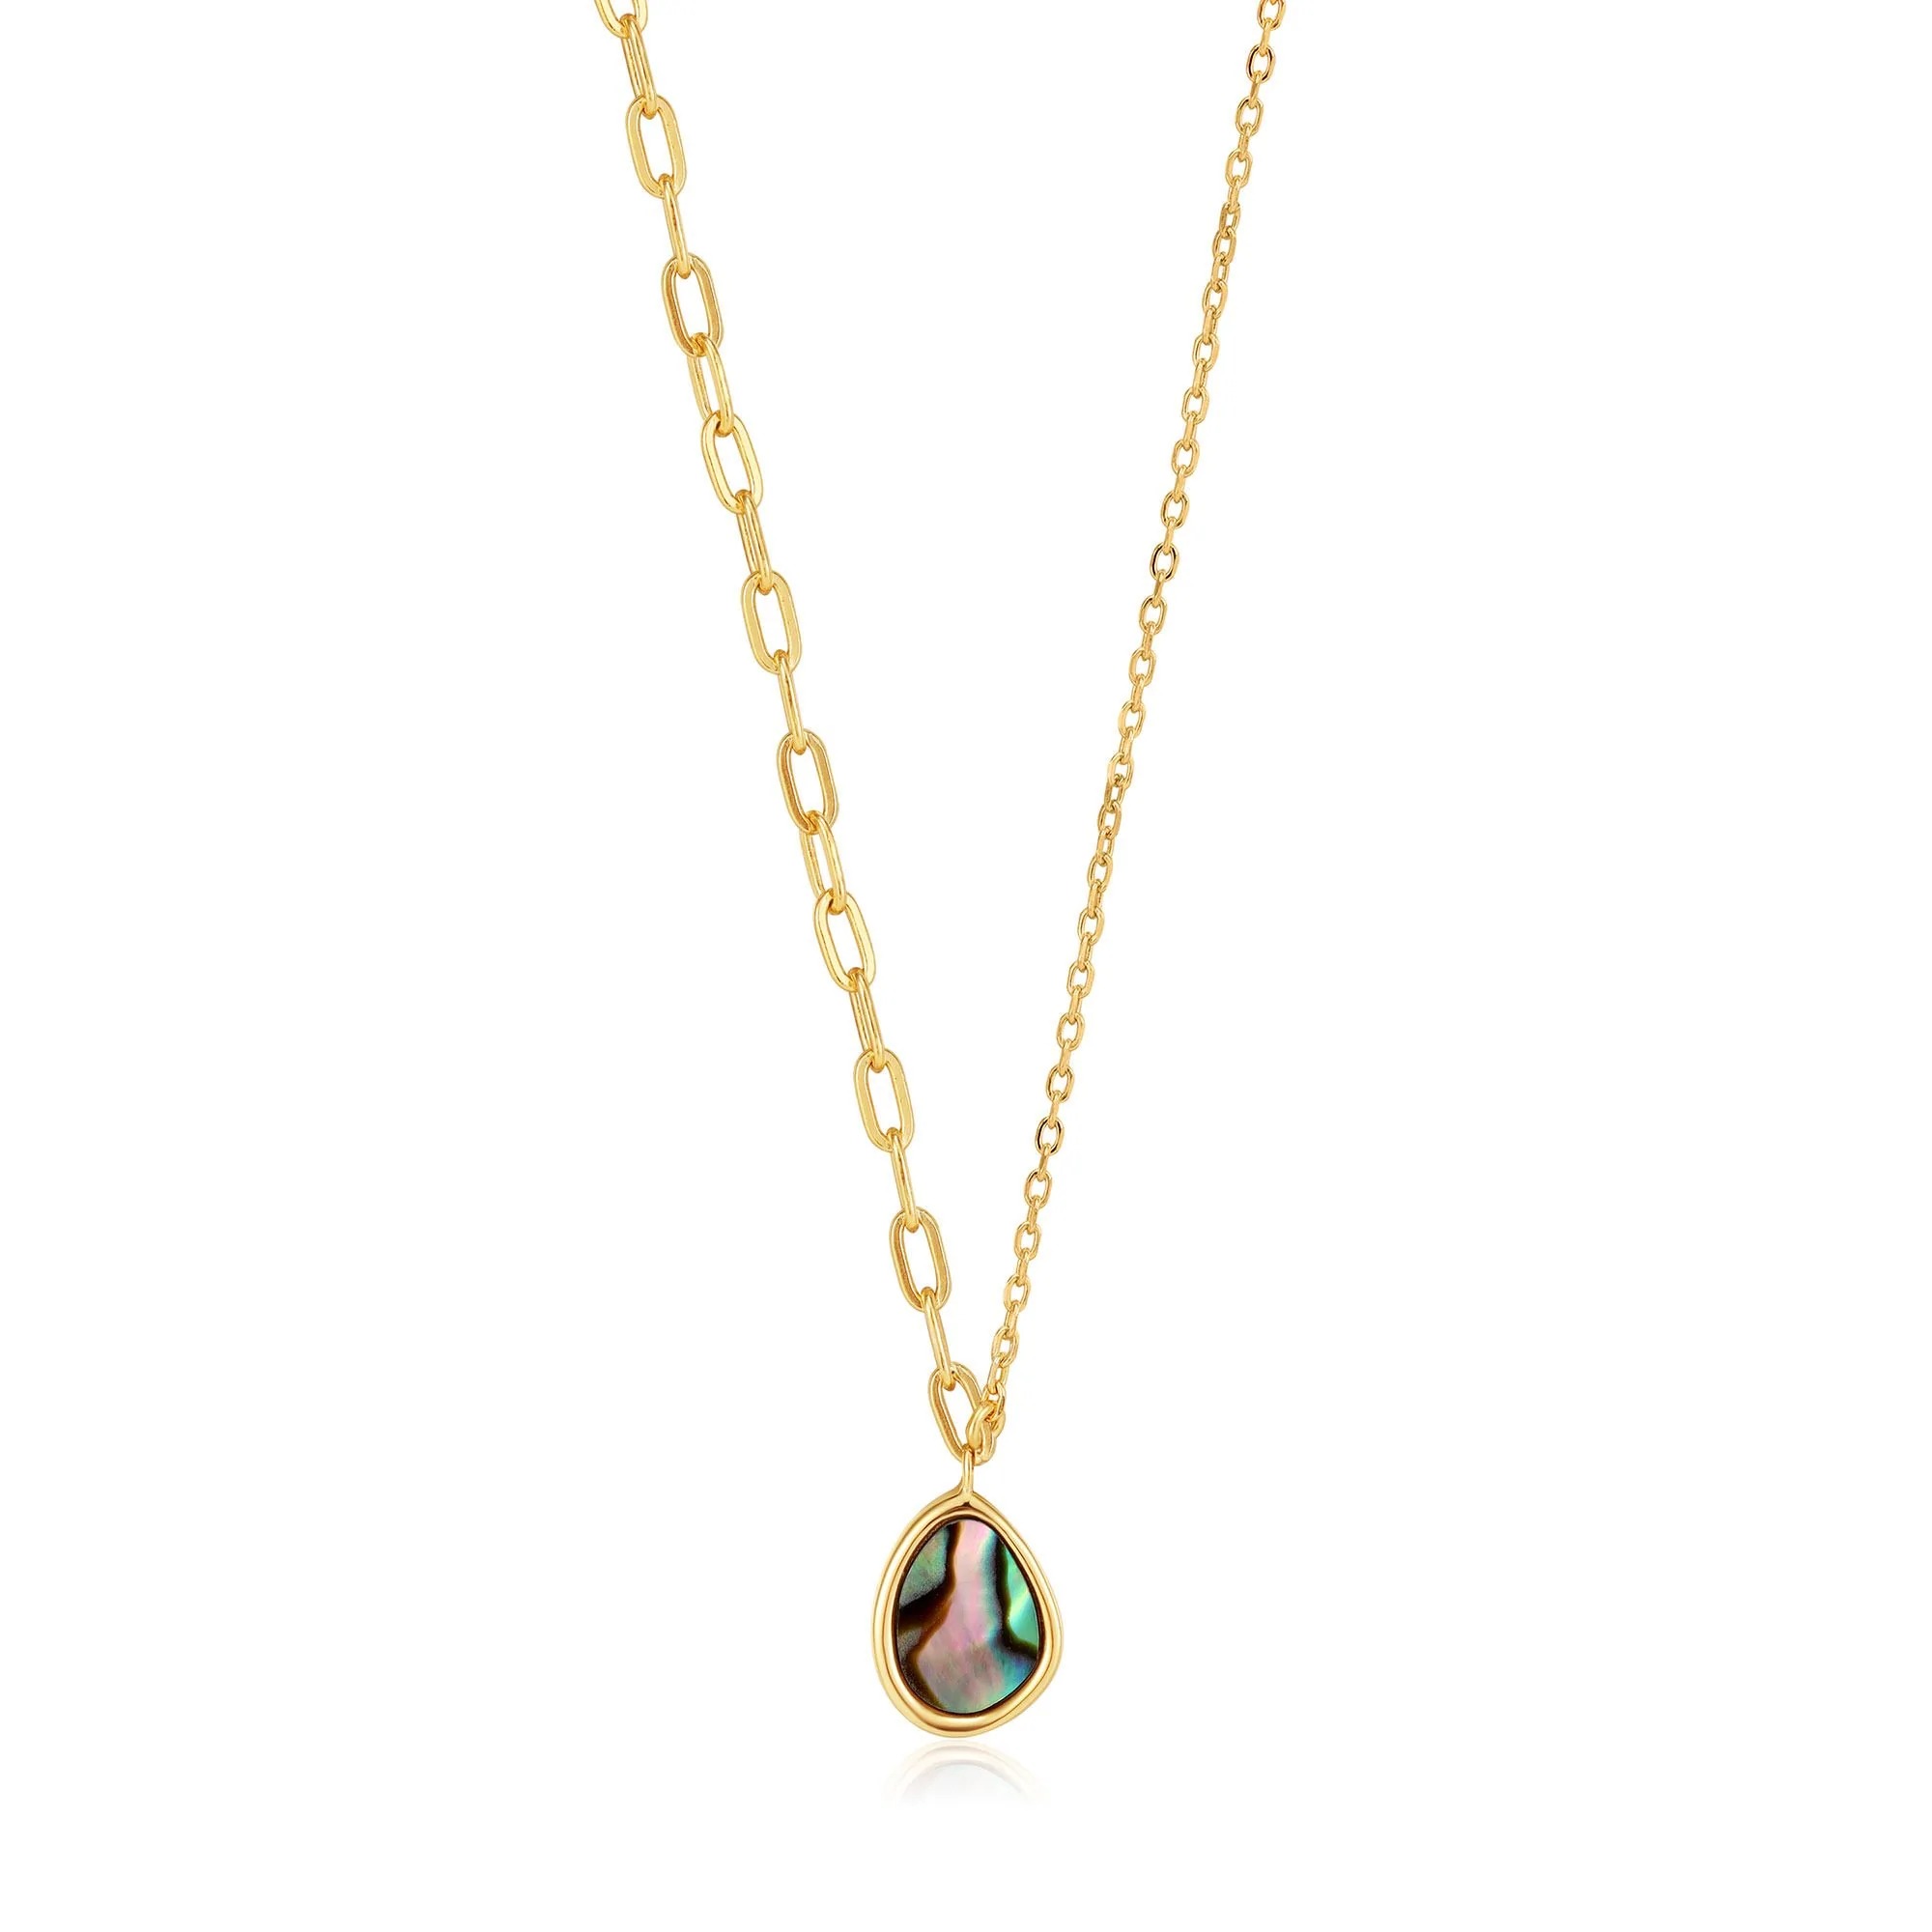 ANIA HAIE Tidal Abalone Mixed Link Necklace, Gold Plate